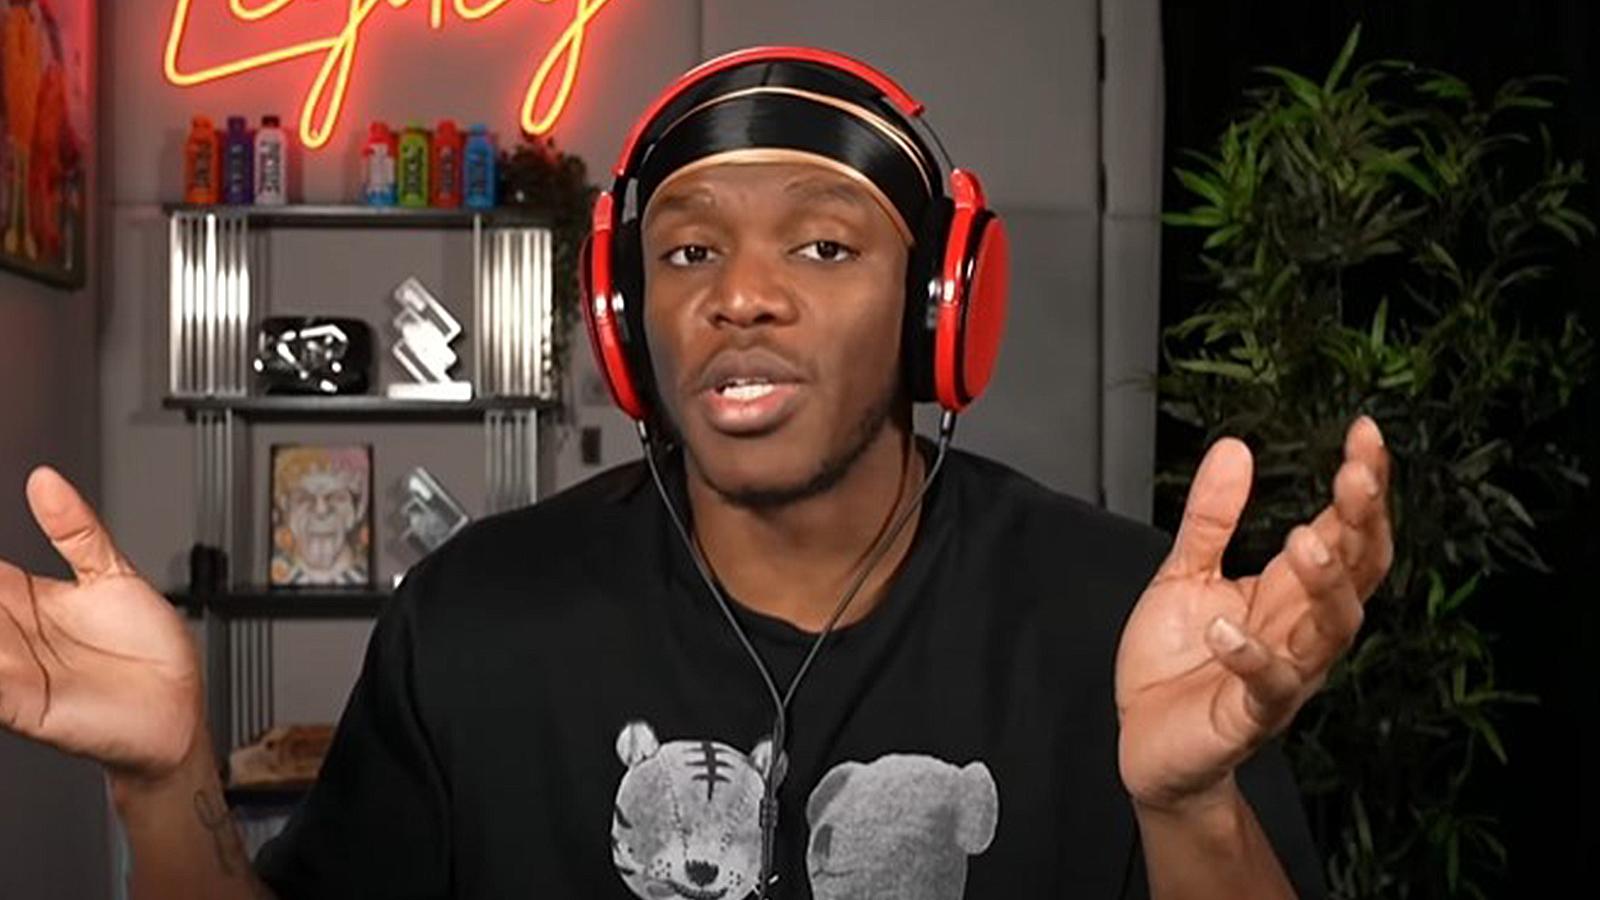 KSI reacts to Logan Paul Cryptozoo scam accusations